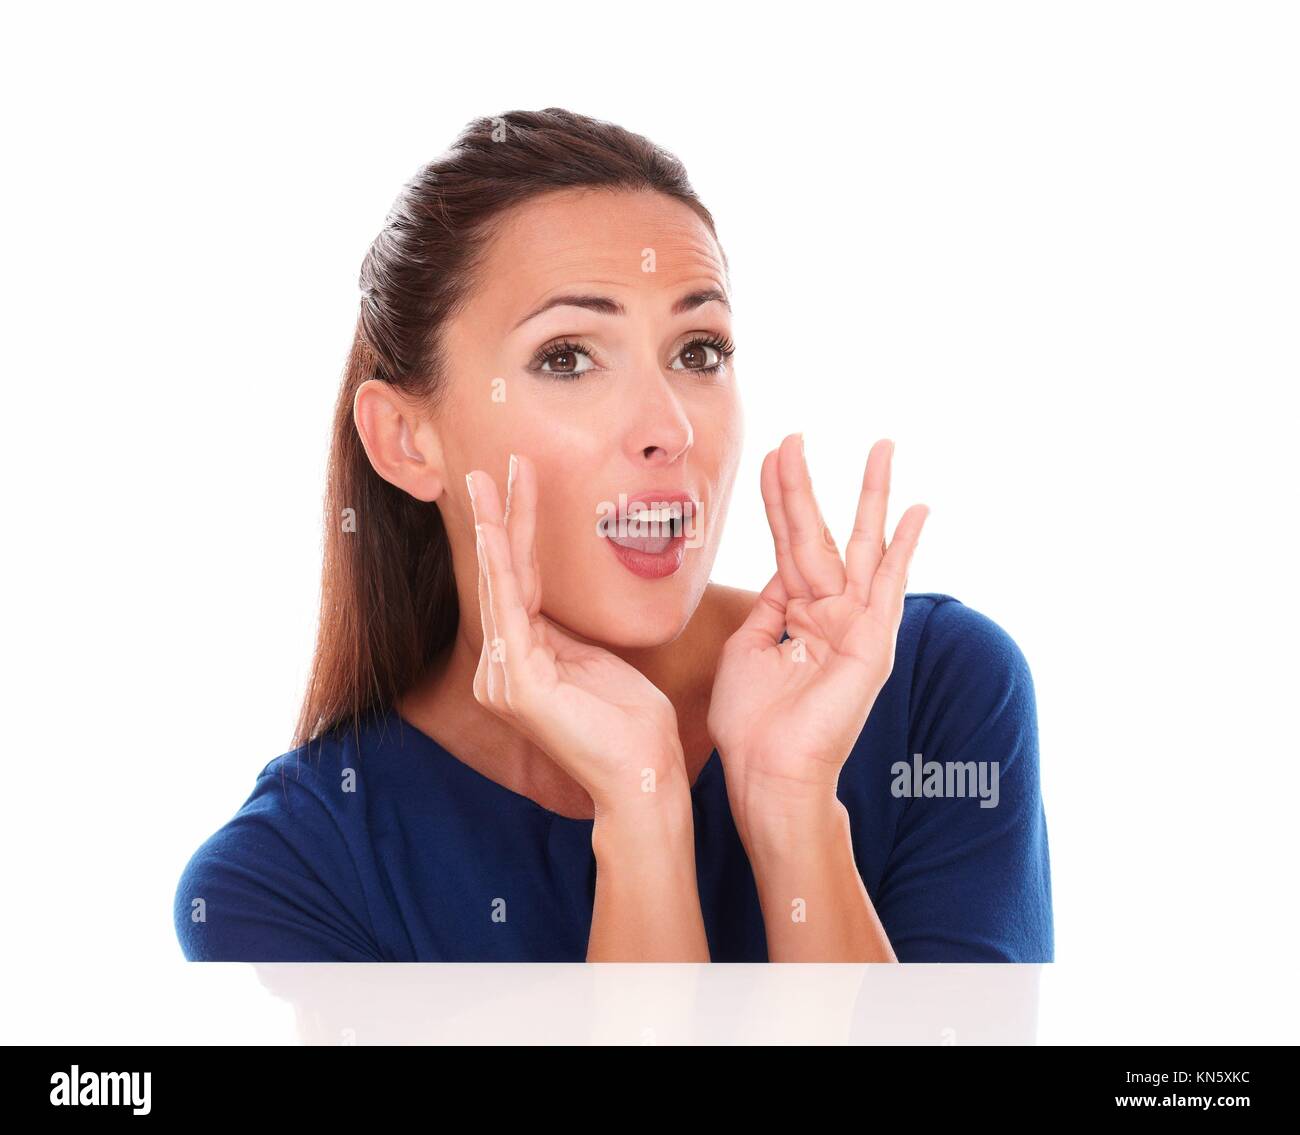 Cheerful lady in blue shirt gesturing screaming in white background - copyspace. Stock Photo